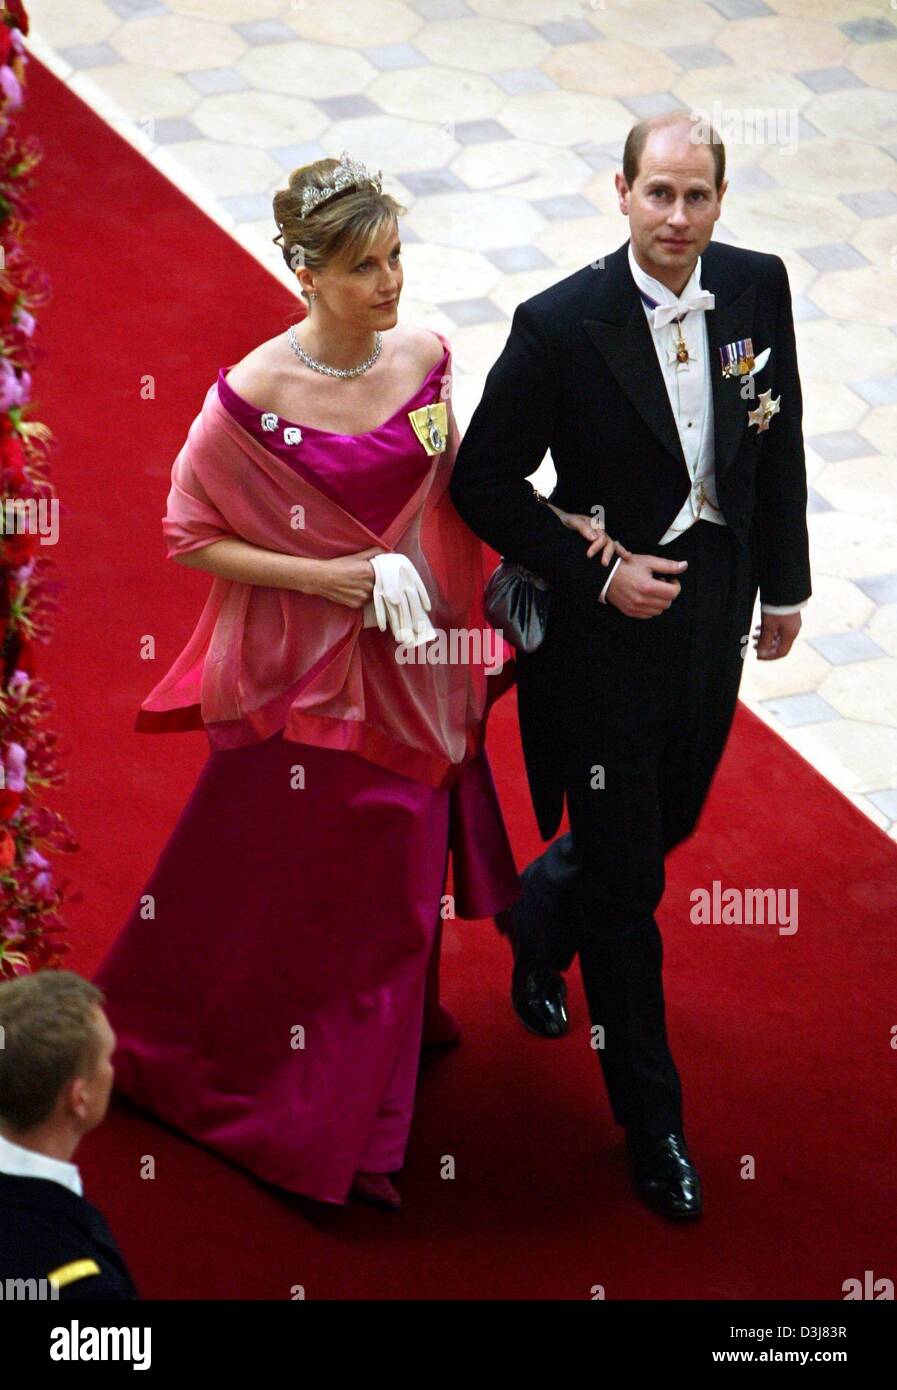 (dpa) - Countess Sophie of Wessex (L) and prince Edward arrive at the wedding of Danish crown prince Frederik and Mary Donaldson at the cathedral in Copenhagen, Denmark, Friday, 14 May 2004. Members of all European royal dynasties were among the 800 invited guests who attended the wedding. Stock Photo